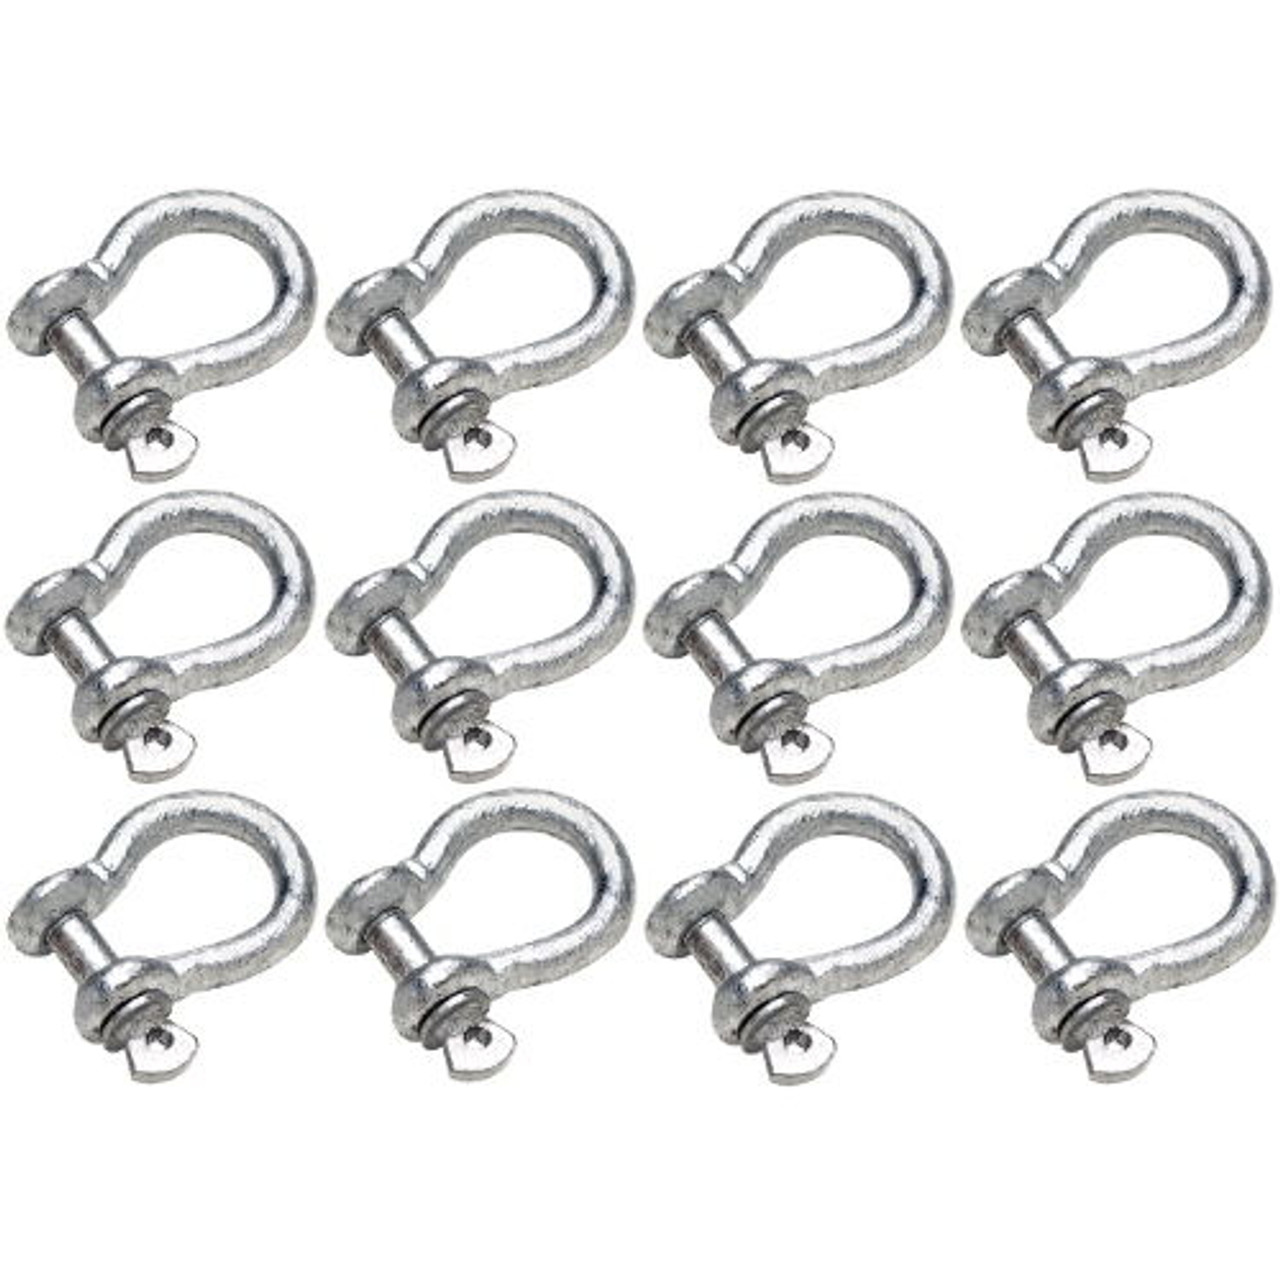 12 Pack of 1/4 Inch Galvanized Anchor Shackles - 4,400 lbs Breaking Strength